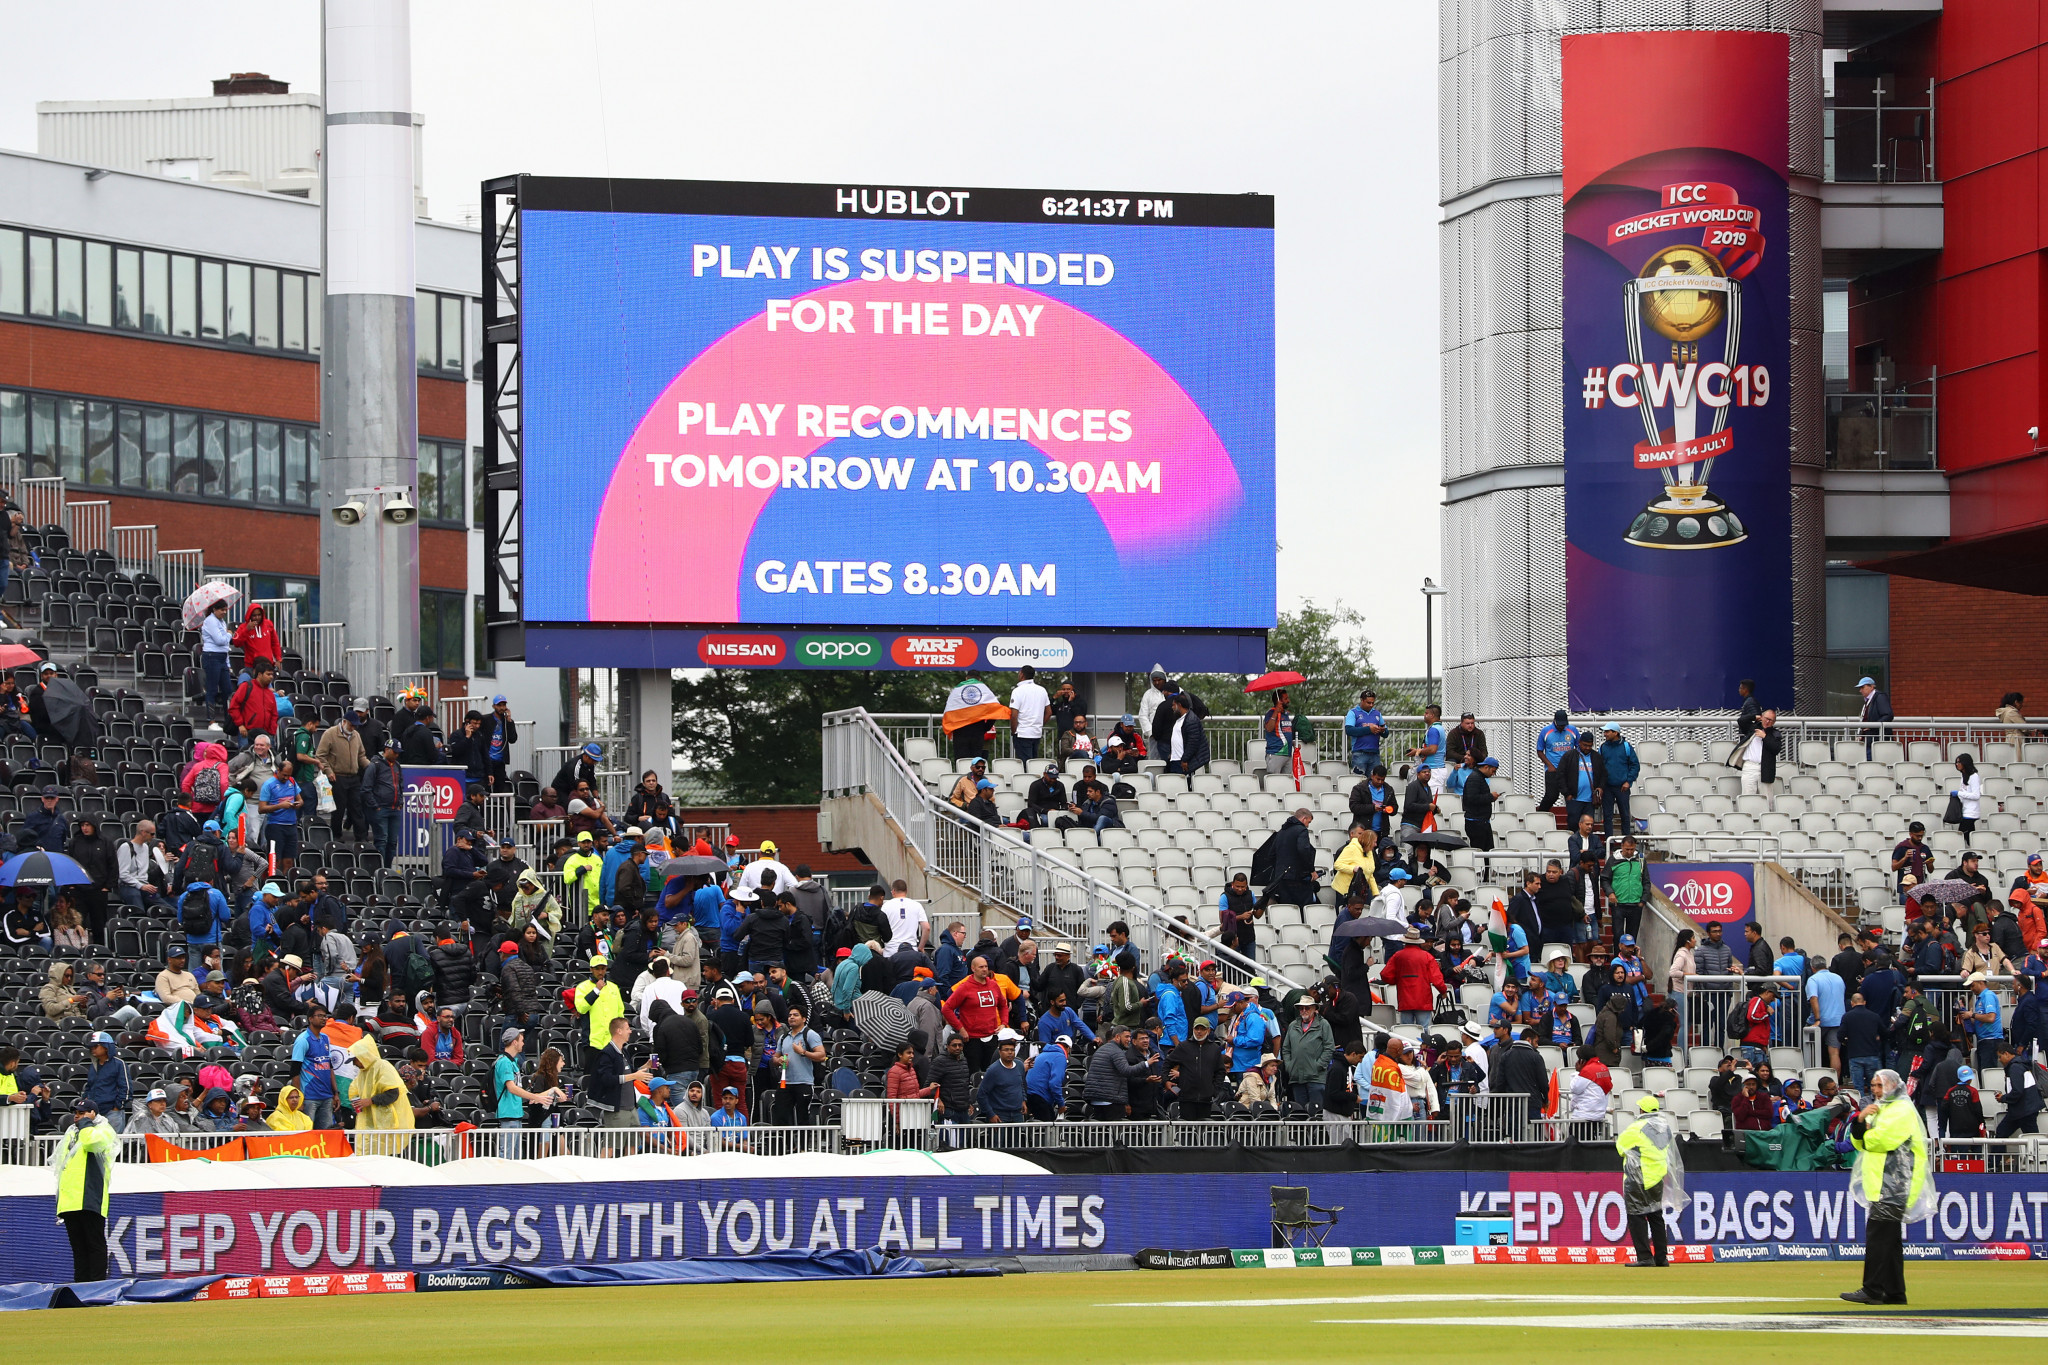 Rain forces ICC Cricket World Cup semi-final between India and New Zealand to be abandoned for day